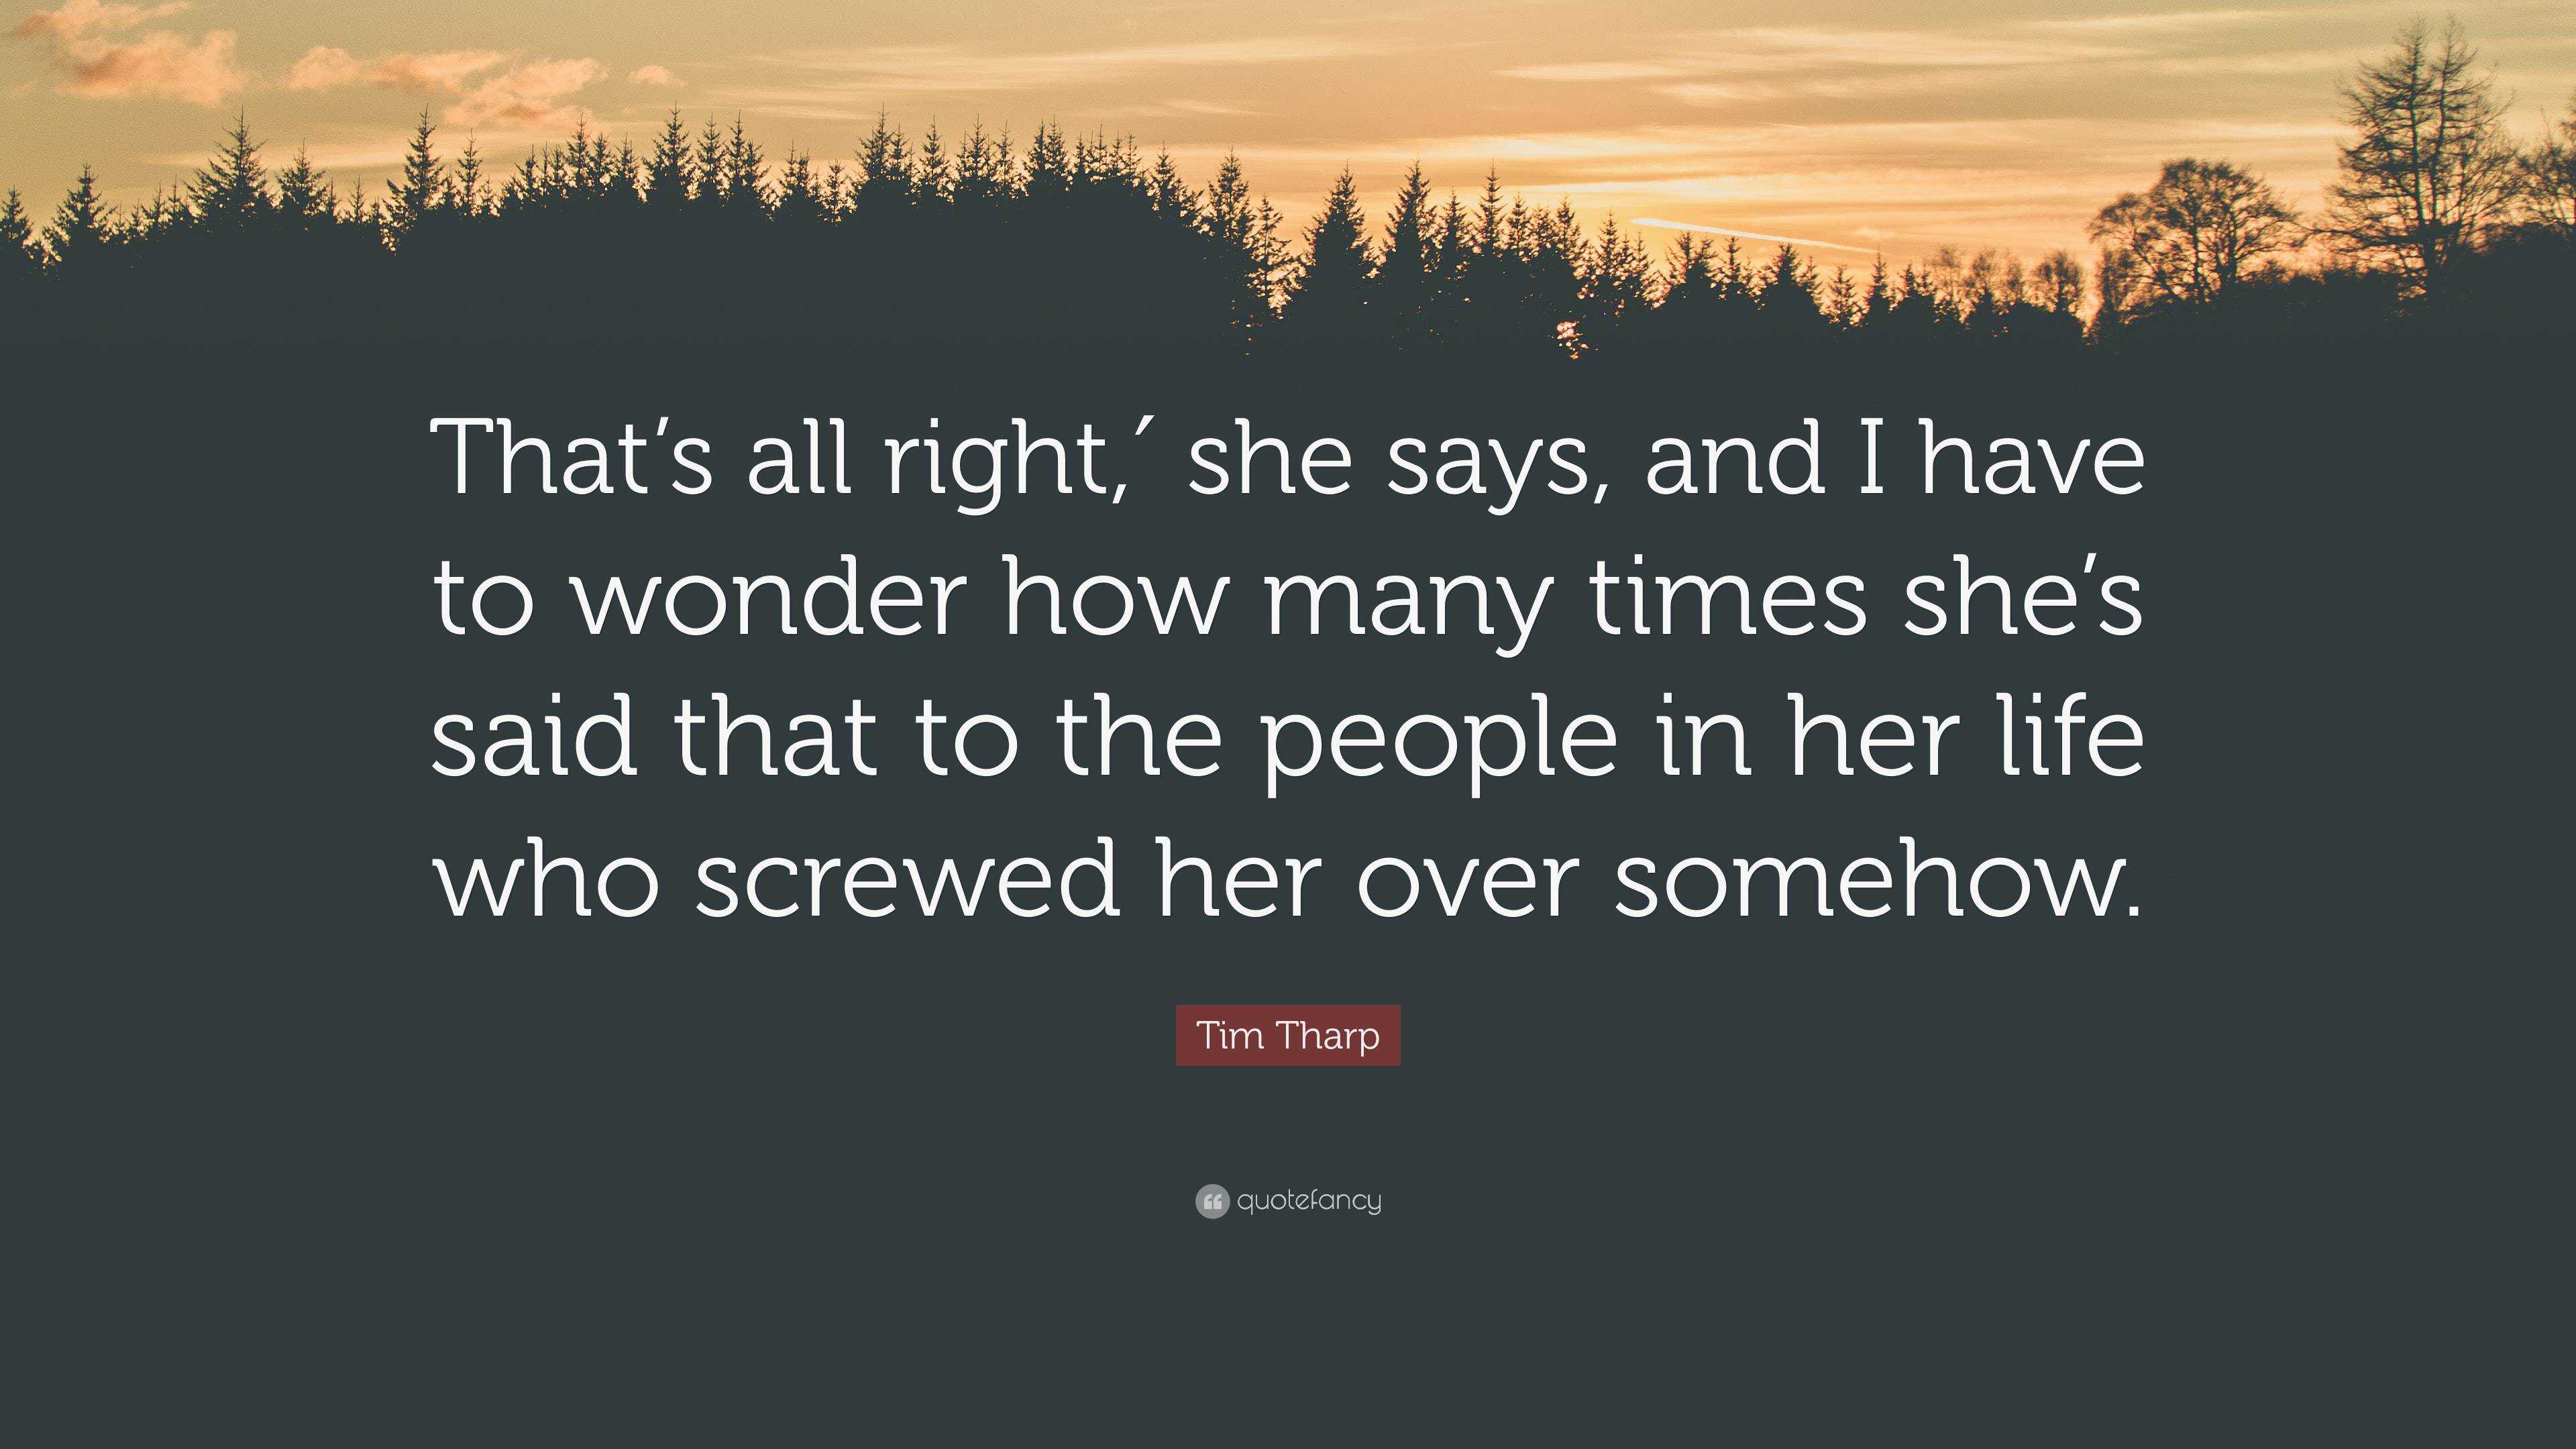 Tim Tharp Quote: “That's right,′ she says, and I have wonder how many times she's said that to the people in her life who screwed h...”